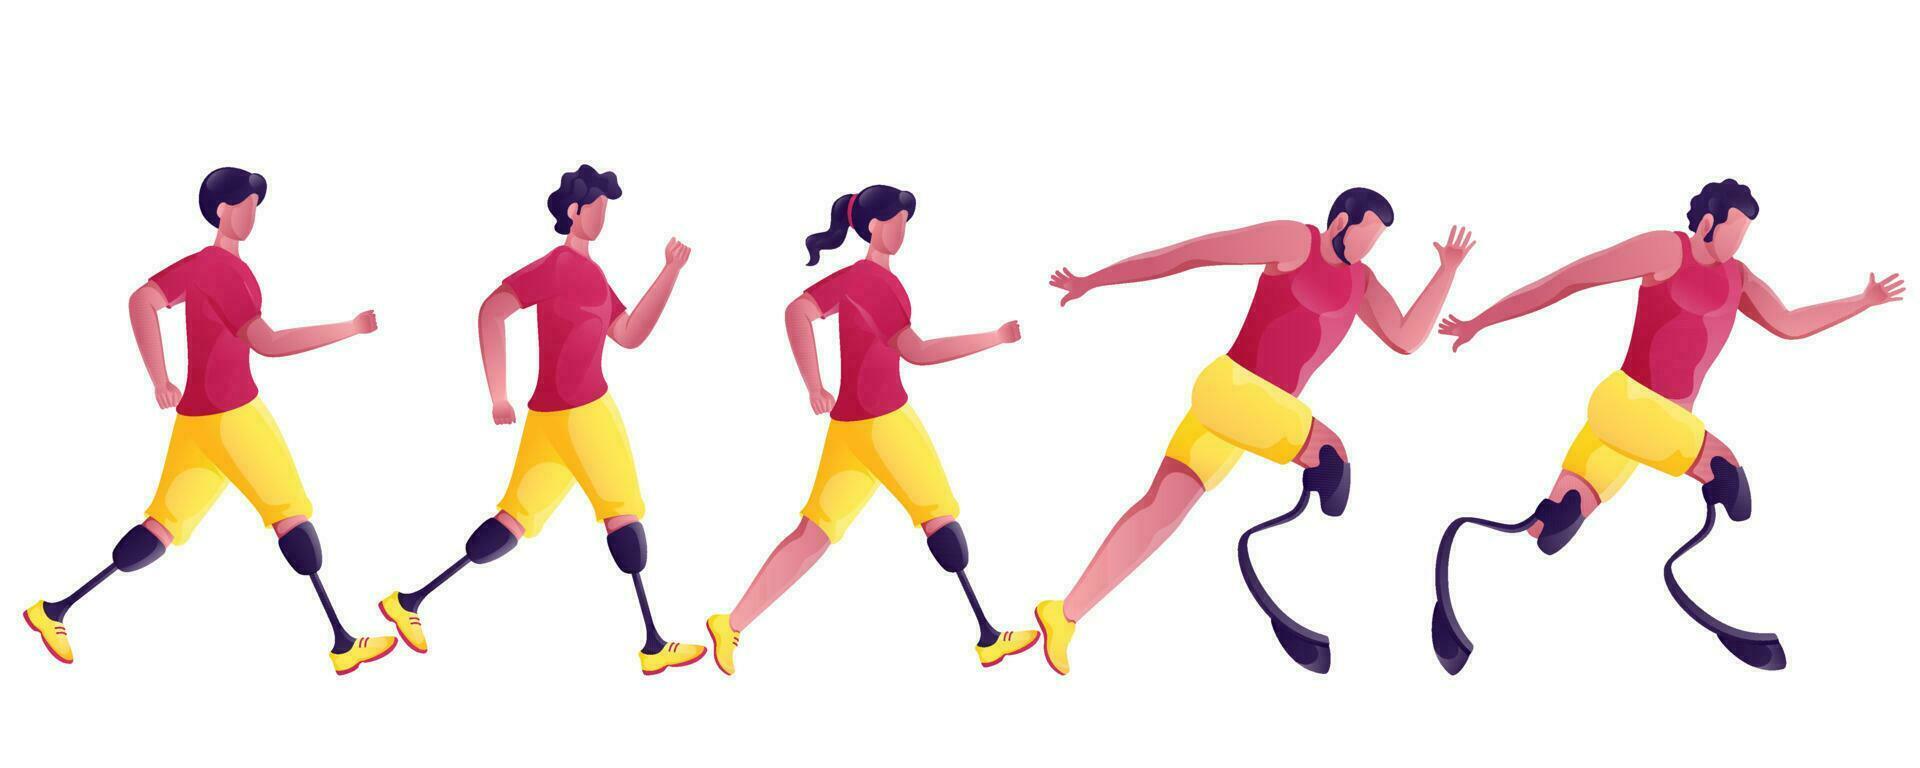 Faceless Disabled Sportsperson or Athletics Running on White Background. vector